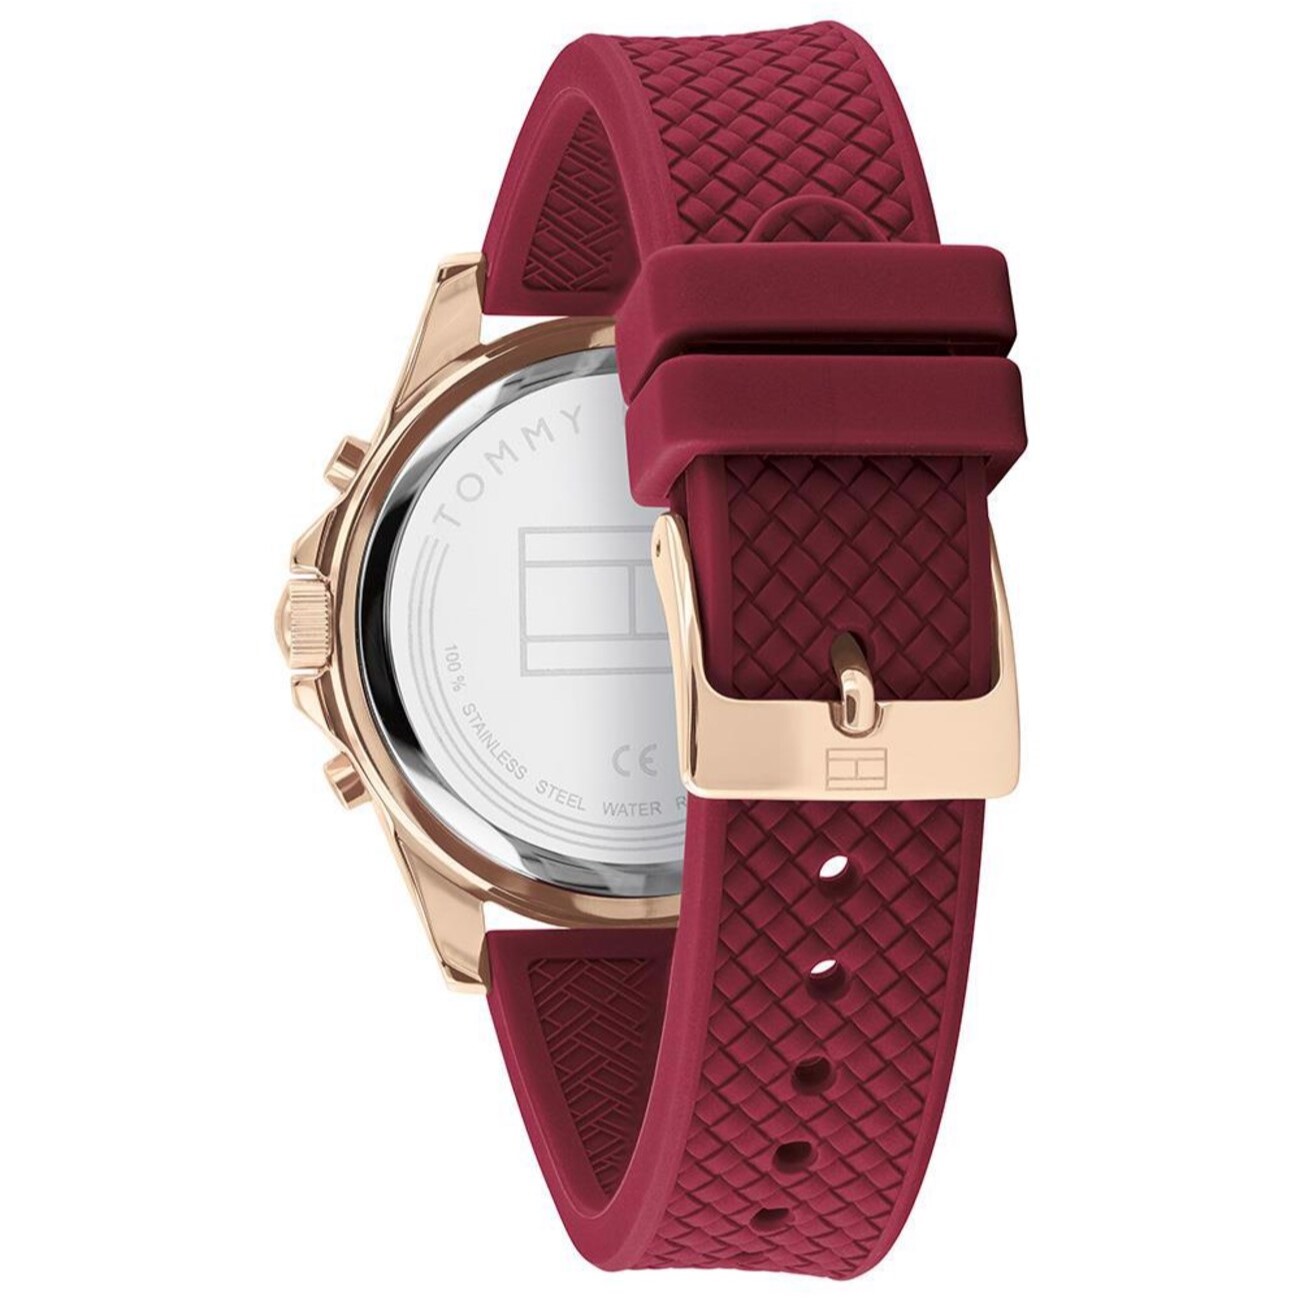 ĐỒNG HỒ NỮ TOMMY HILFIGER ROSE GOLD SPORT WATCH WITH RED SILICONE STRAP HAVEN ANALOG WATCH FOR WOMEN TH1782200W 12